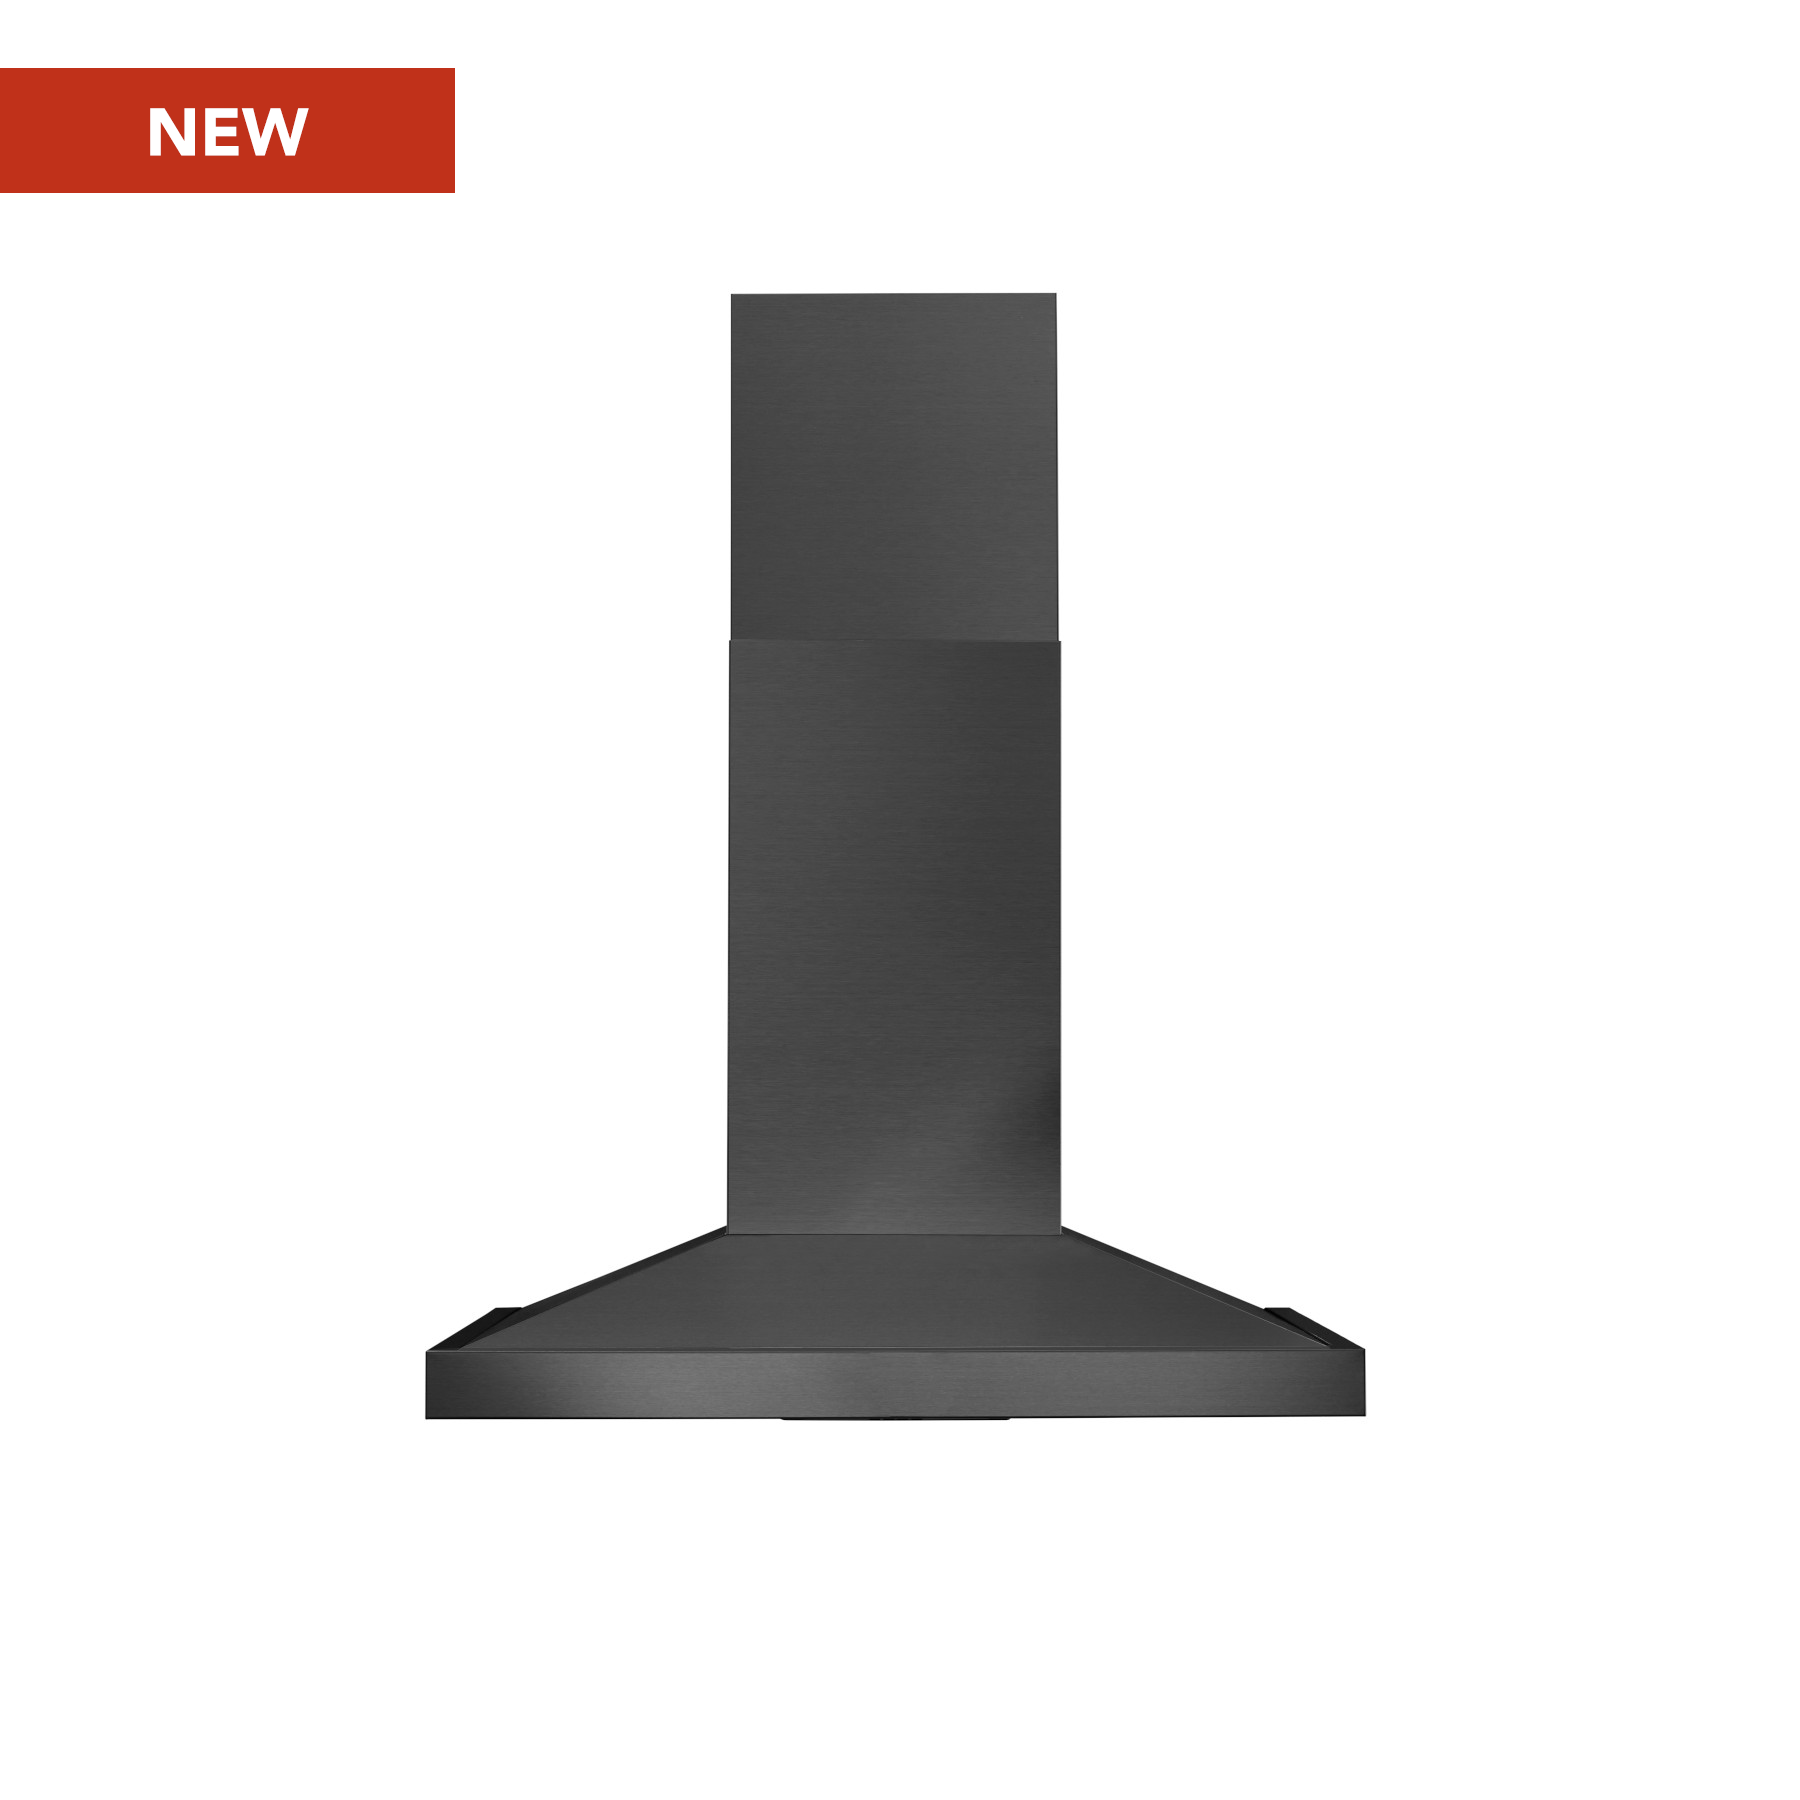 Broan® 30-inch Pyramid Chimney Range Hood with Code Ready™ Technology, 650 Max Blower CFM, Black Stainless Steel